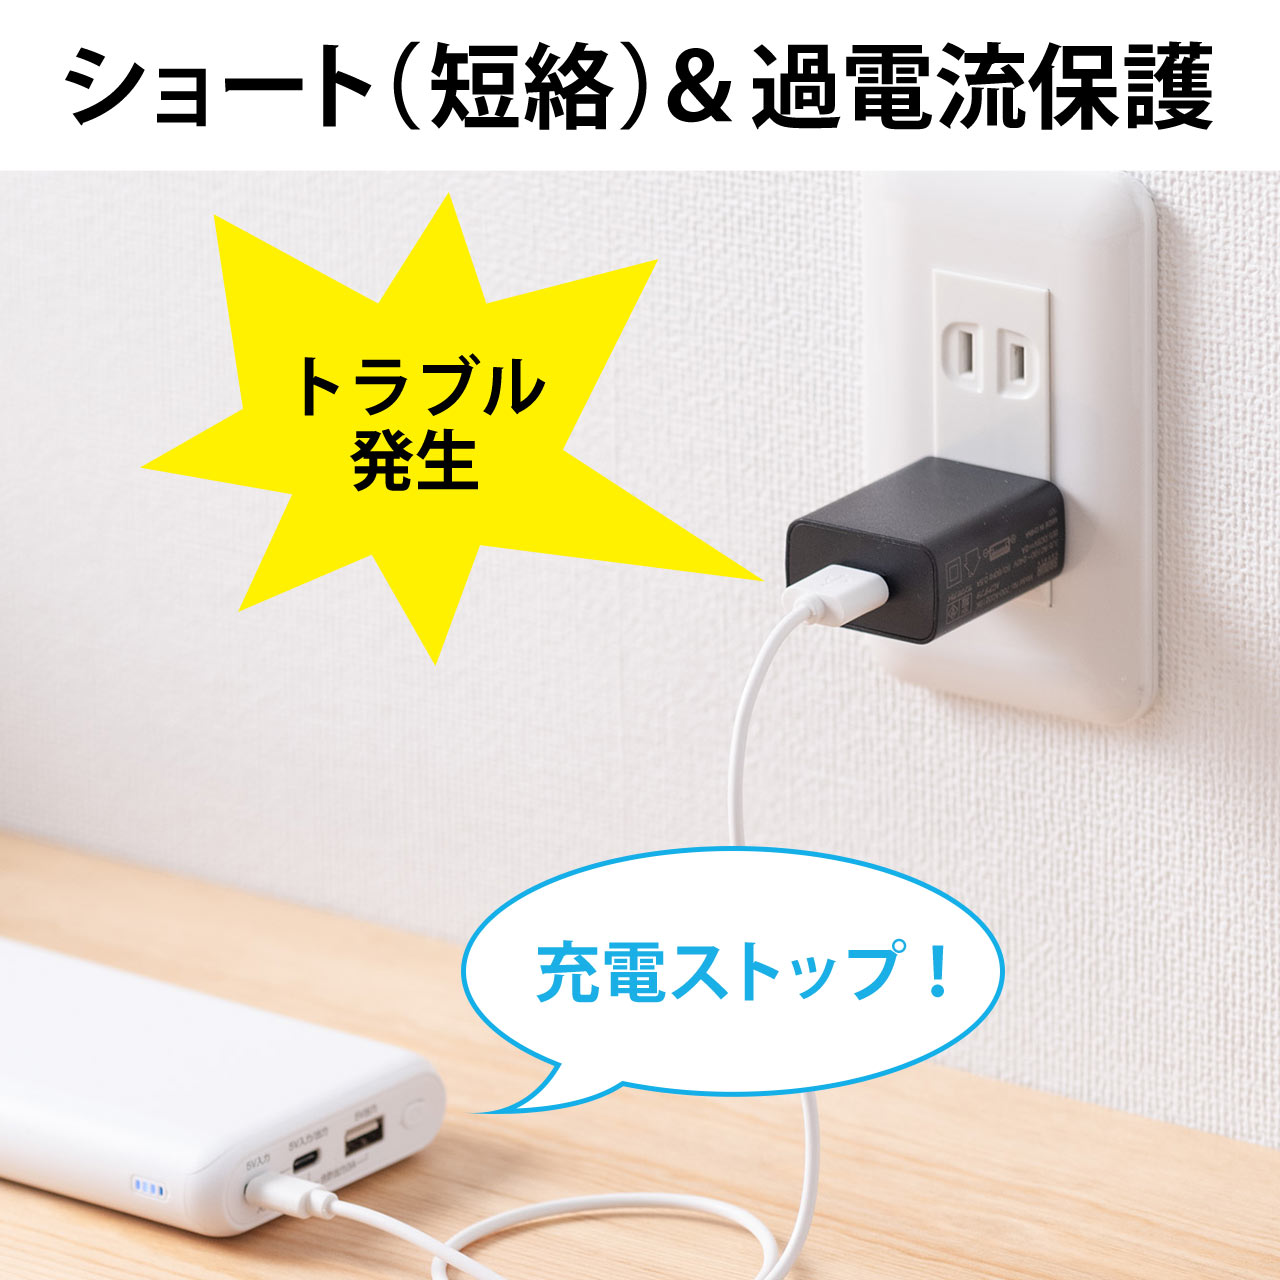 USB充電器 1ポート 2A コンパクト PSE取得 iPhone Xperia充電対応 PS5 ブラック 絶縁キャップ付き 小型 700-AC021BK